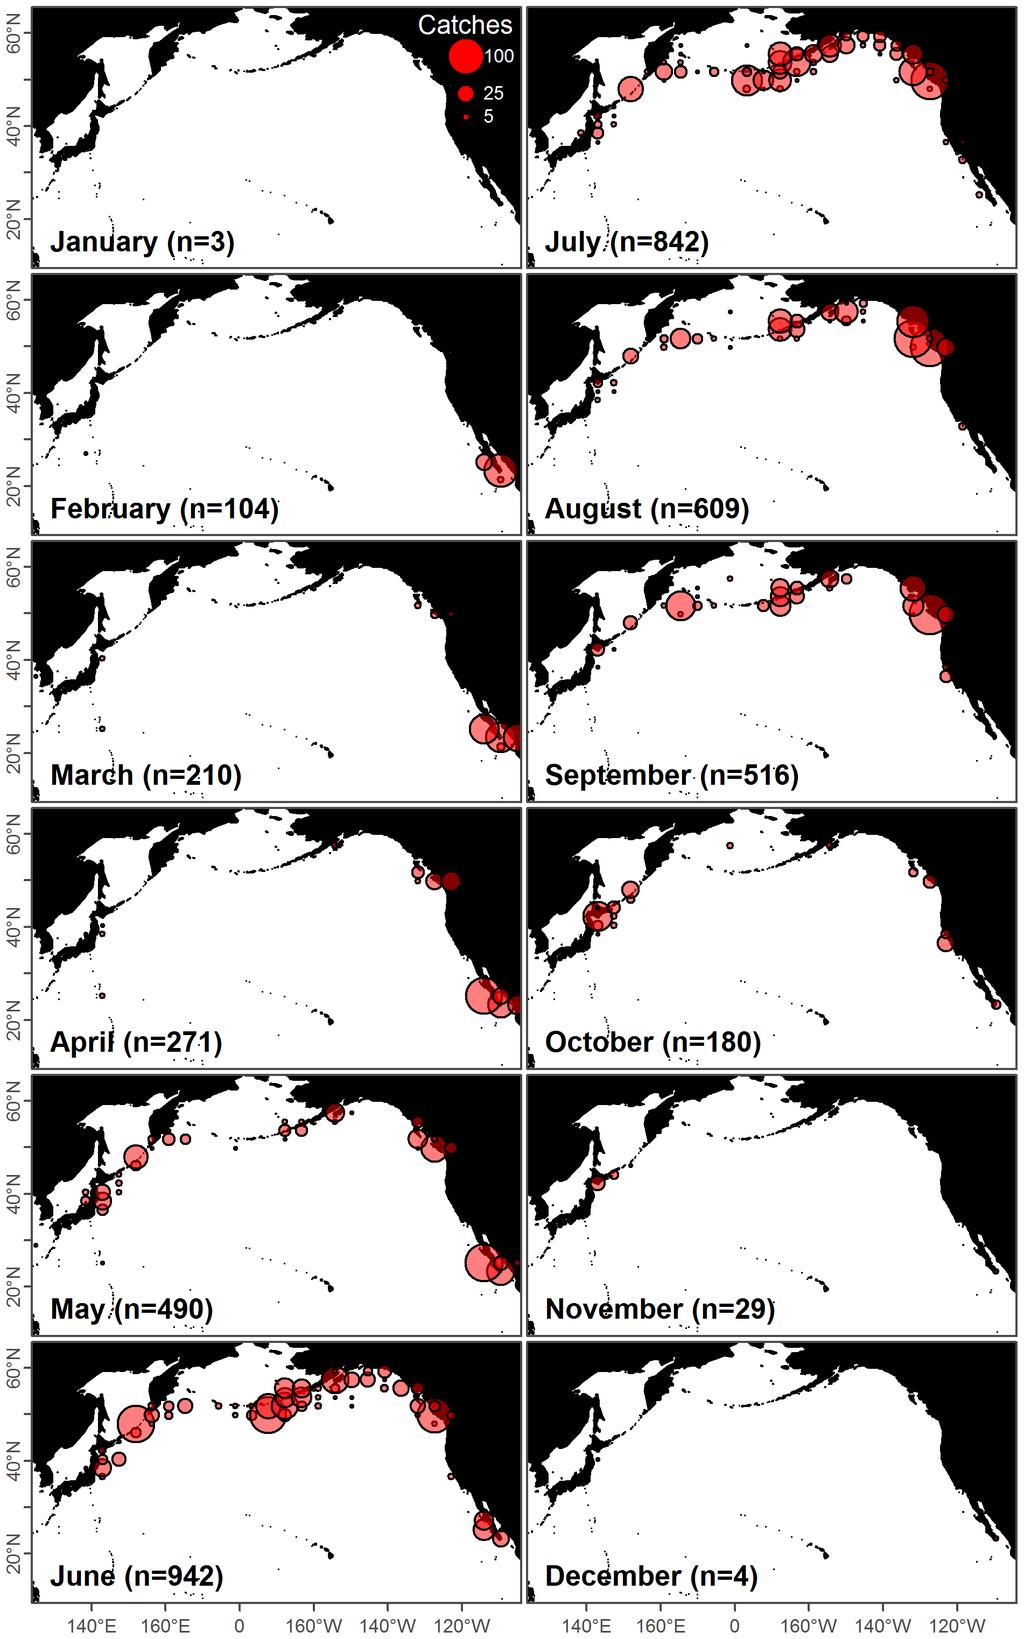 Figure 2. Distribution of the blue whale catches with reported locations.